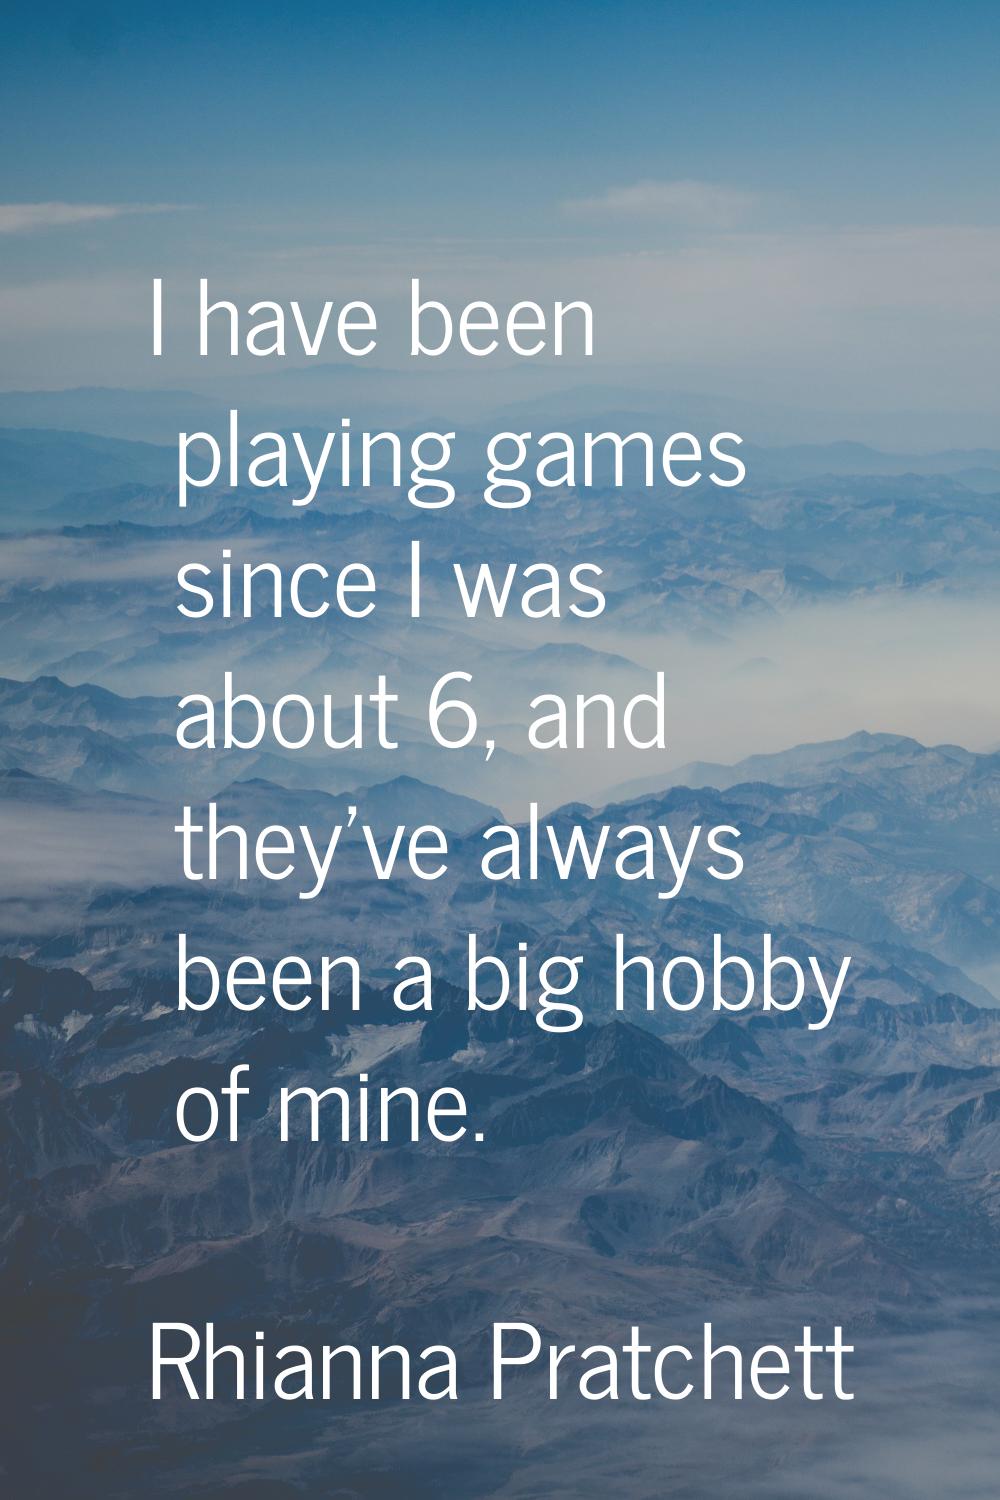 I have been playing games since I was about 6, and they've always been a big hobby of mine.